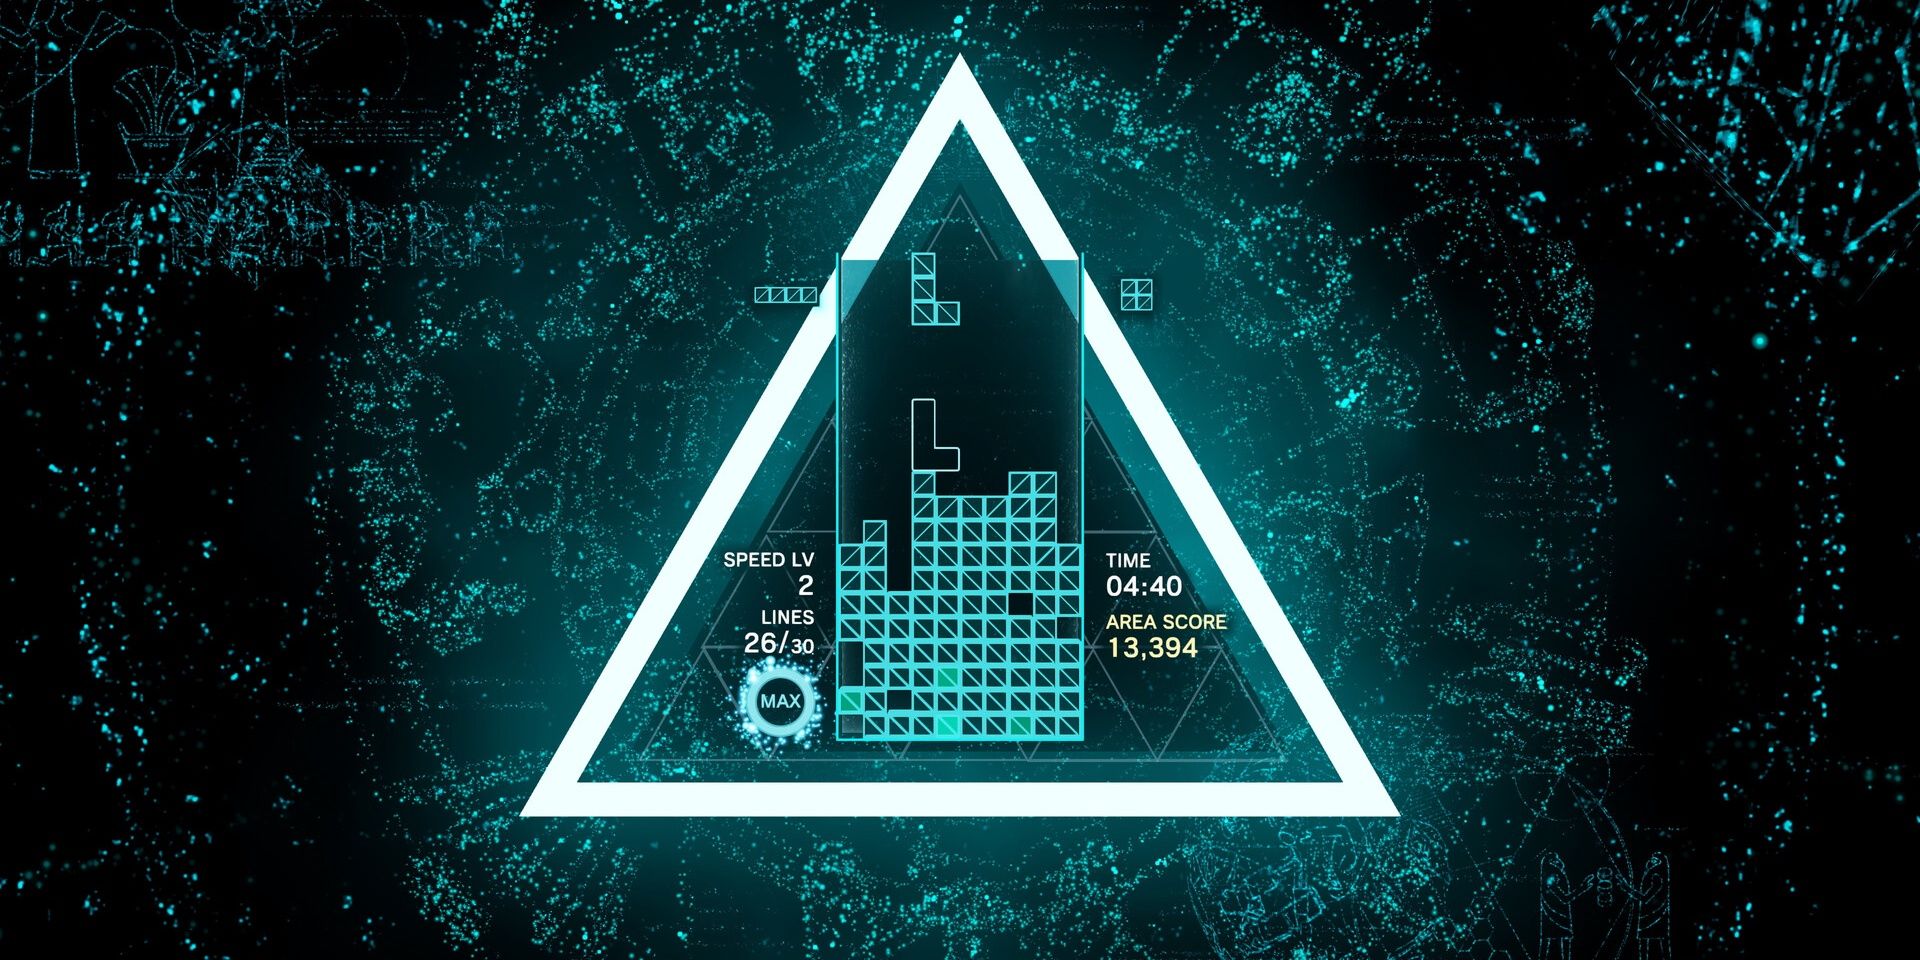 A Tetris game that is being played on top of a glowing triangle in Tetris Effect